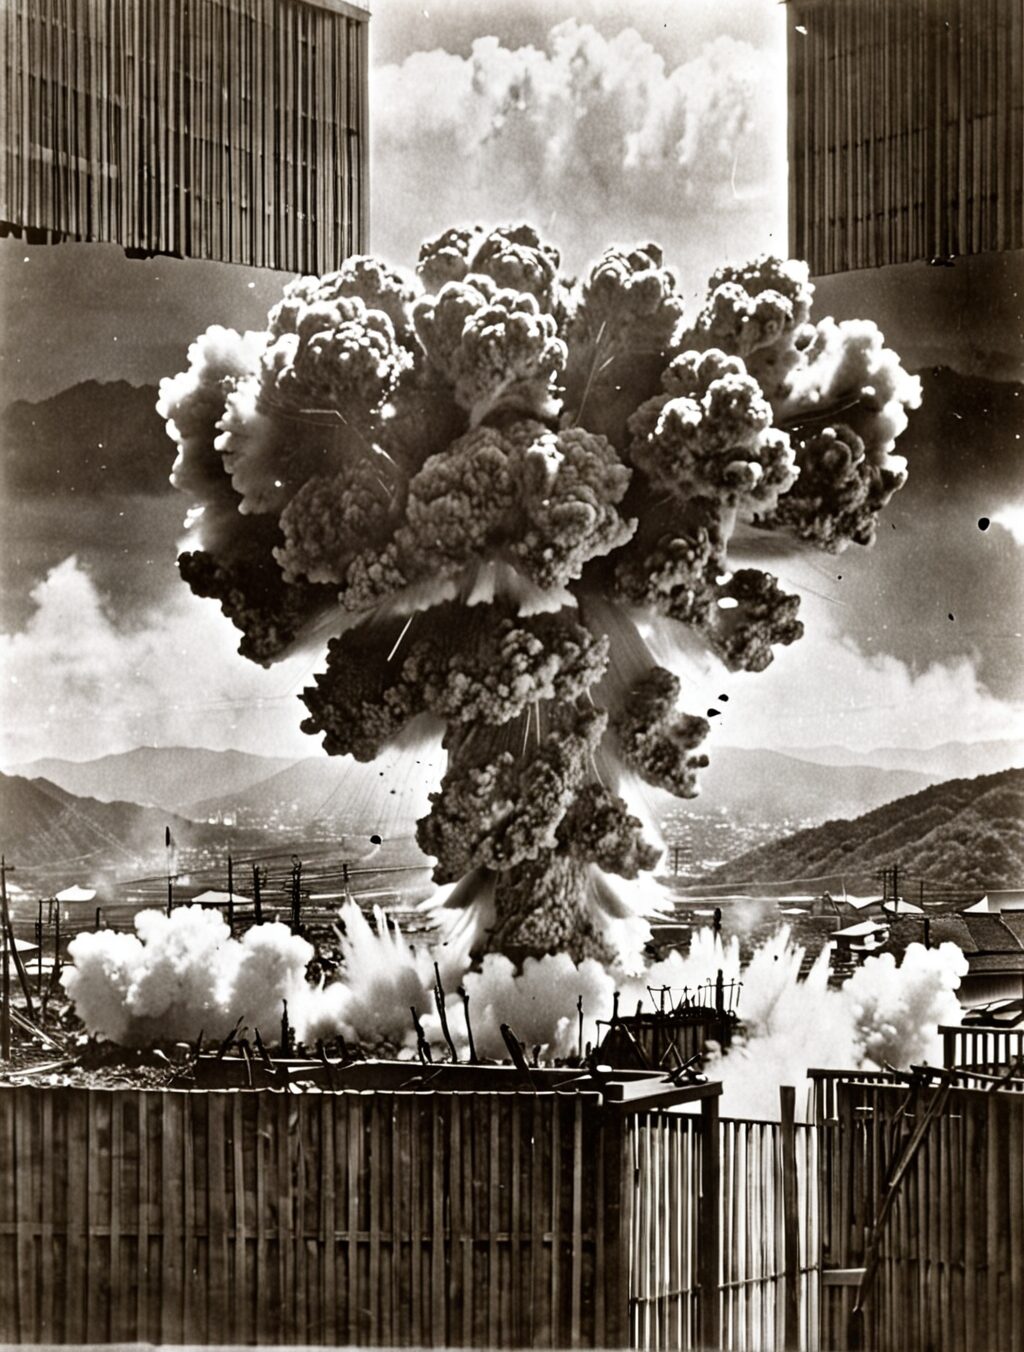 why were atomic bombs used on japan apex